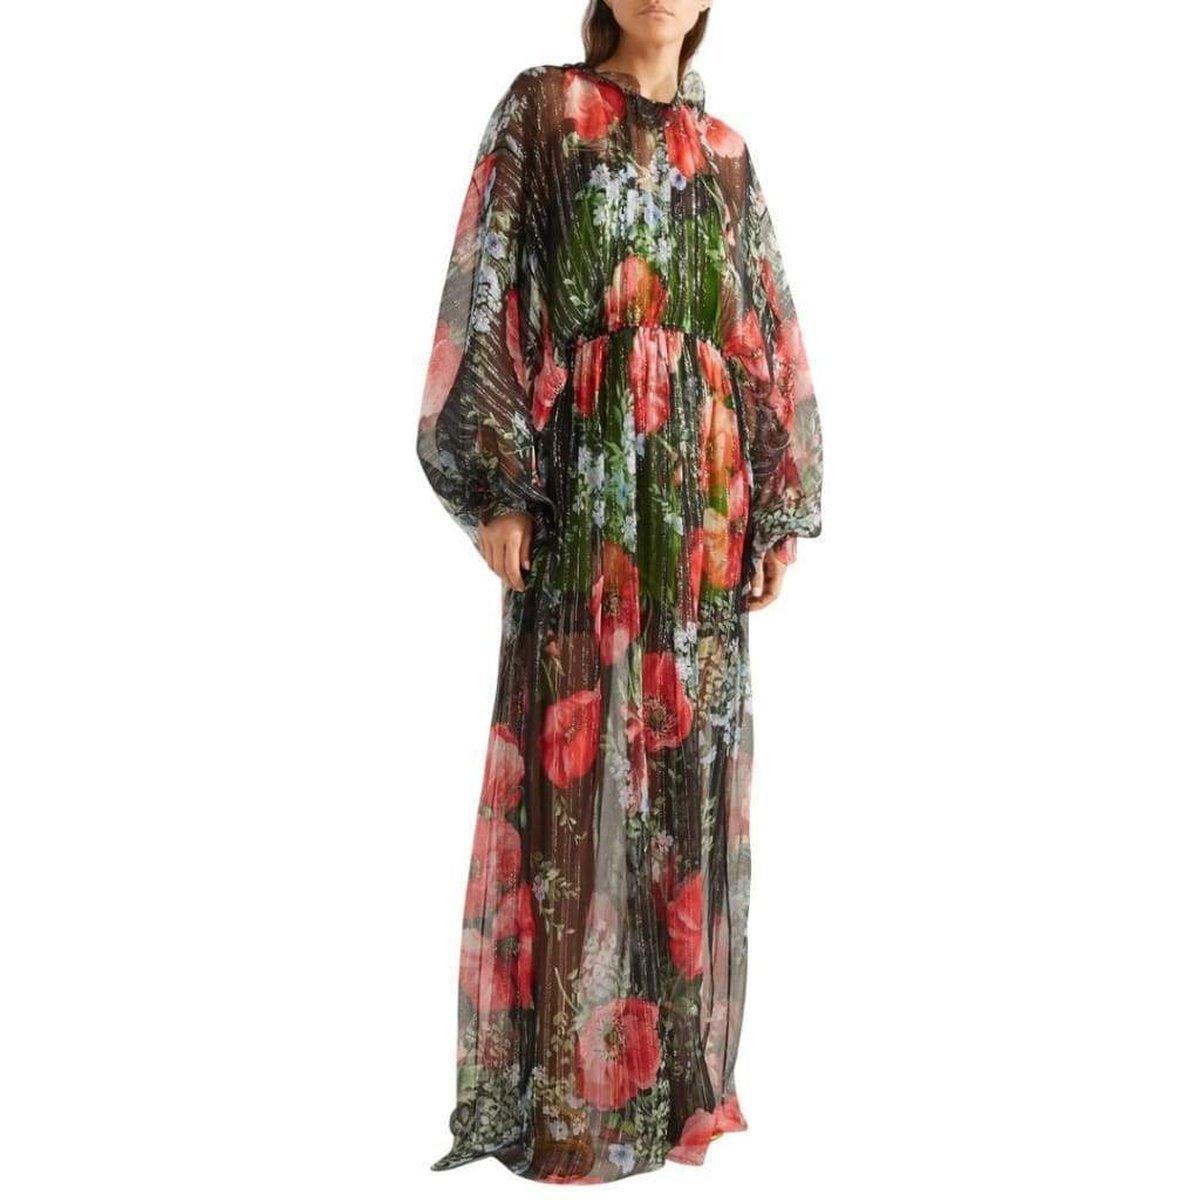 Gucci Floral-print Crinkled Silk-blend Chiffon Gown IT42 US6 2